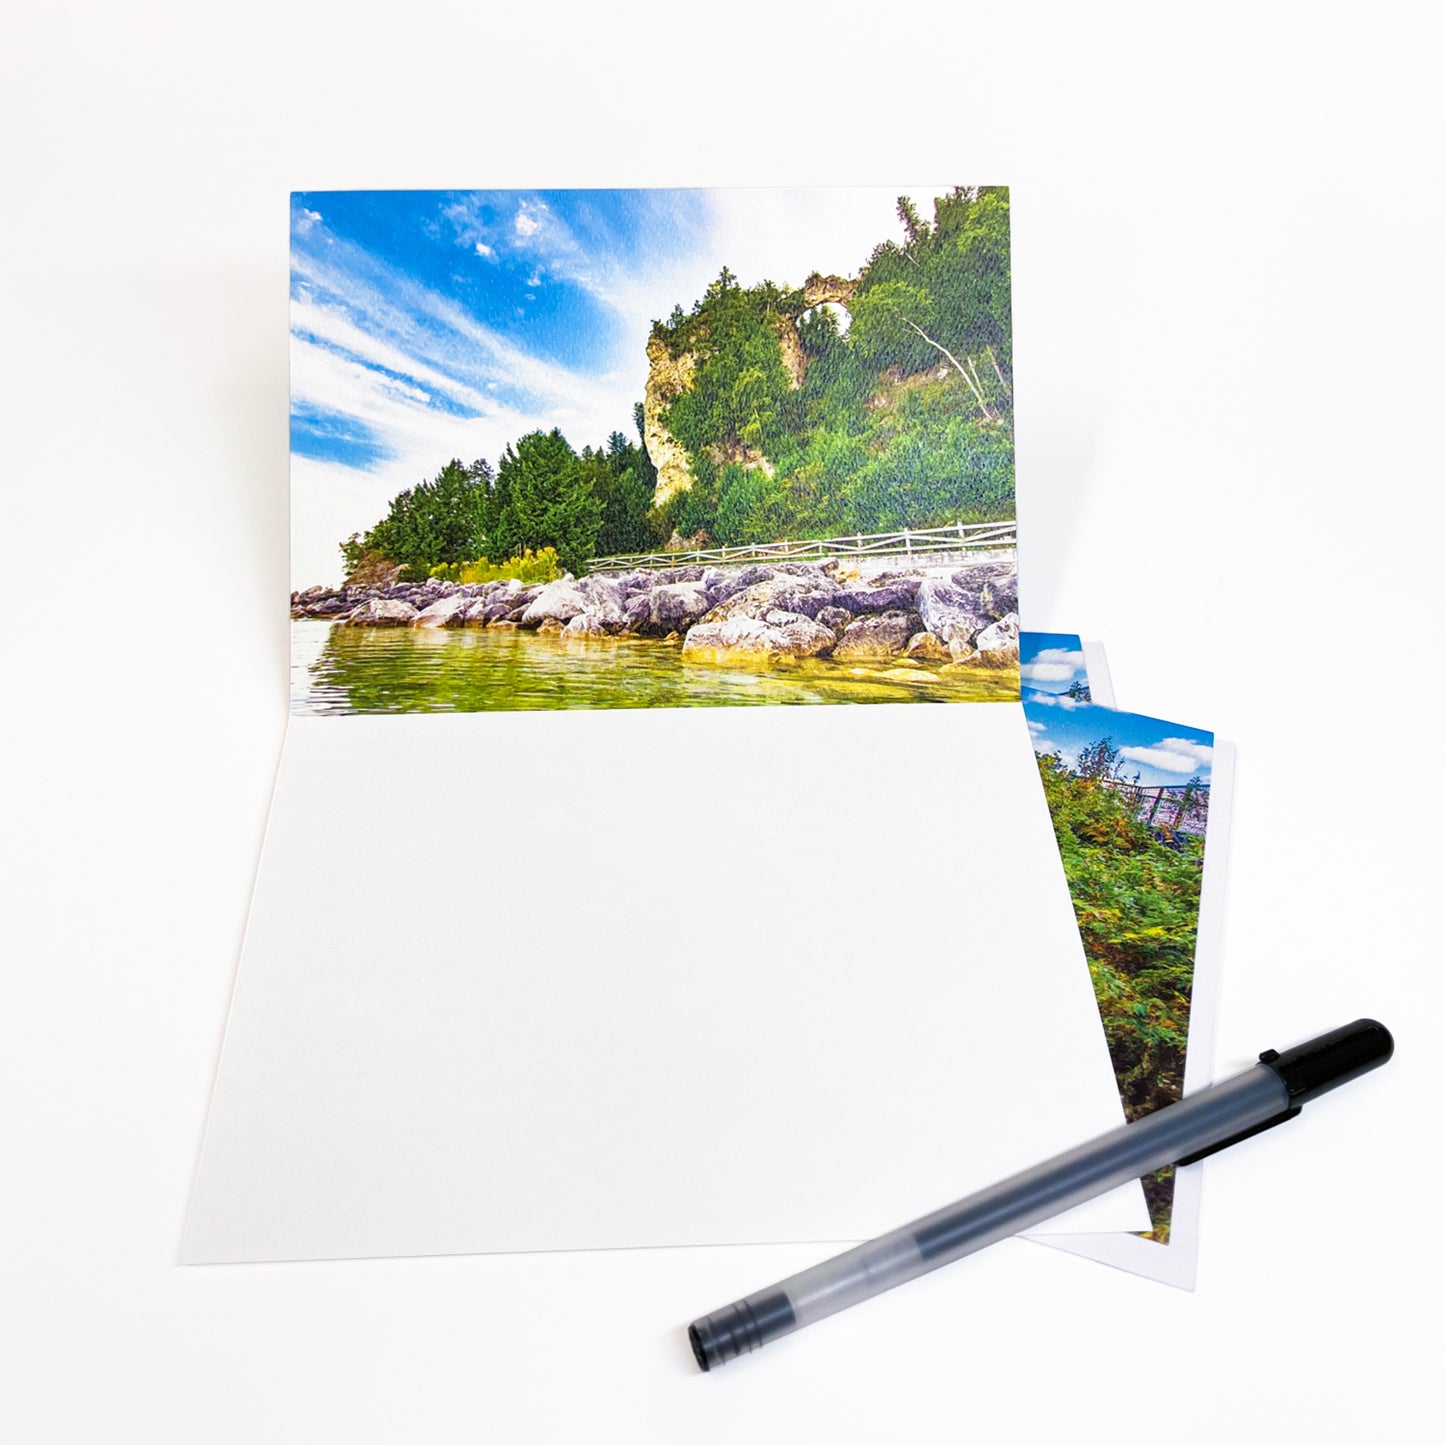 Blank greeting card featuring a photograph of Mackinac Island's iconic Arch Rock by local artist Jennifer Wohletz of Mackinac Memories. 